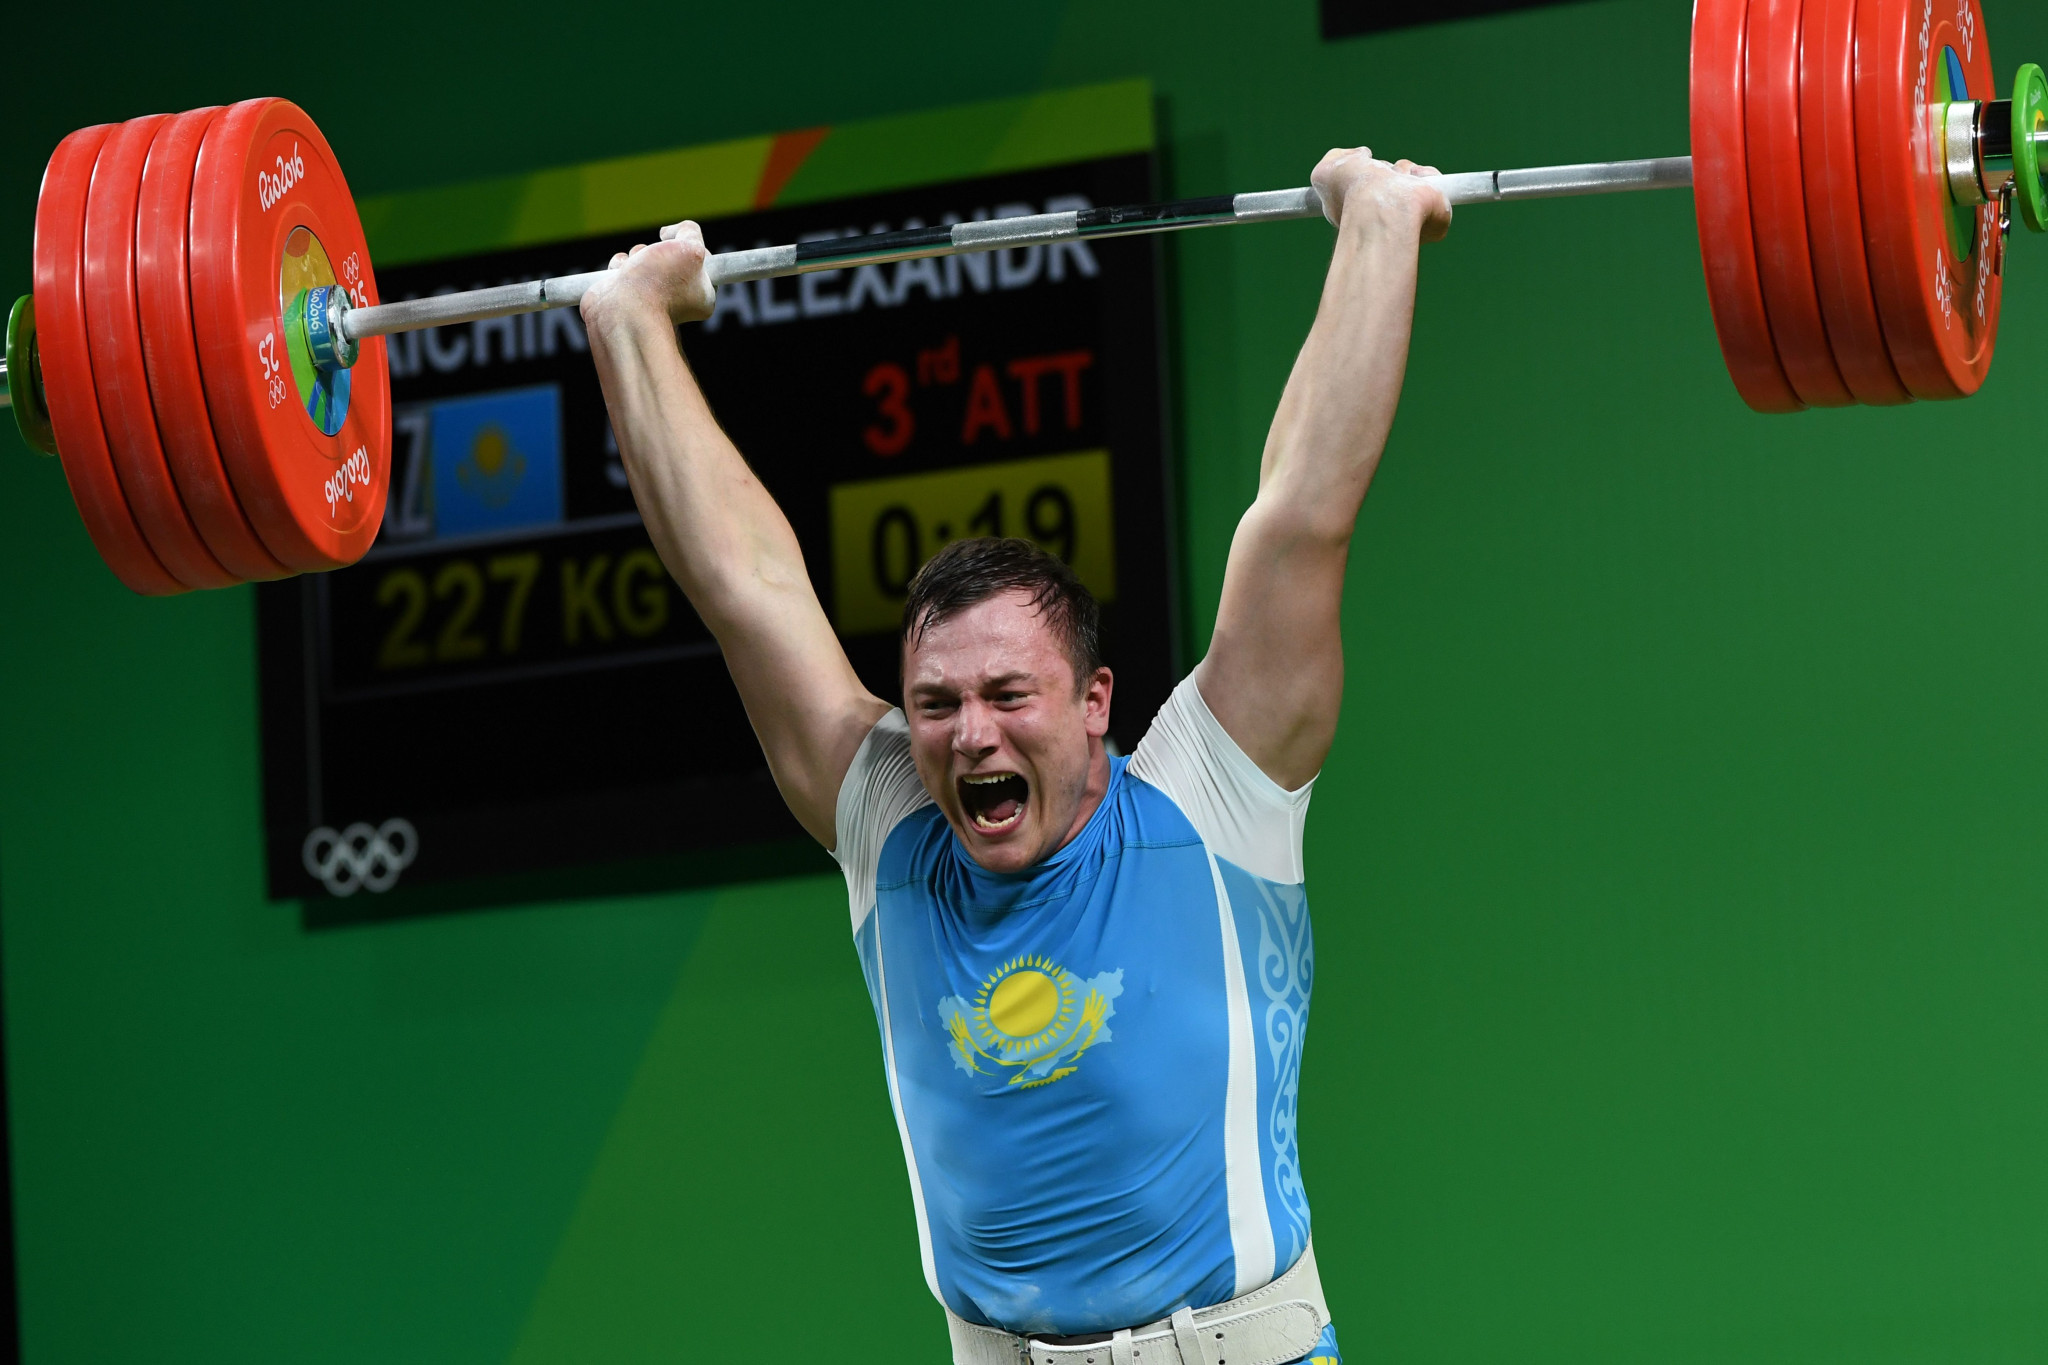 Kazakhstan claims strong support for decision to challenge Olympic weightlifting qualifying system